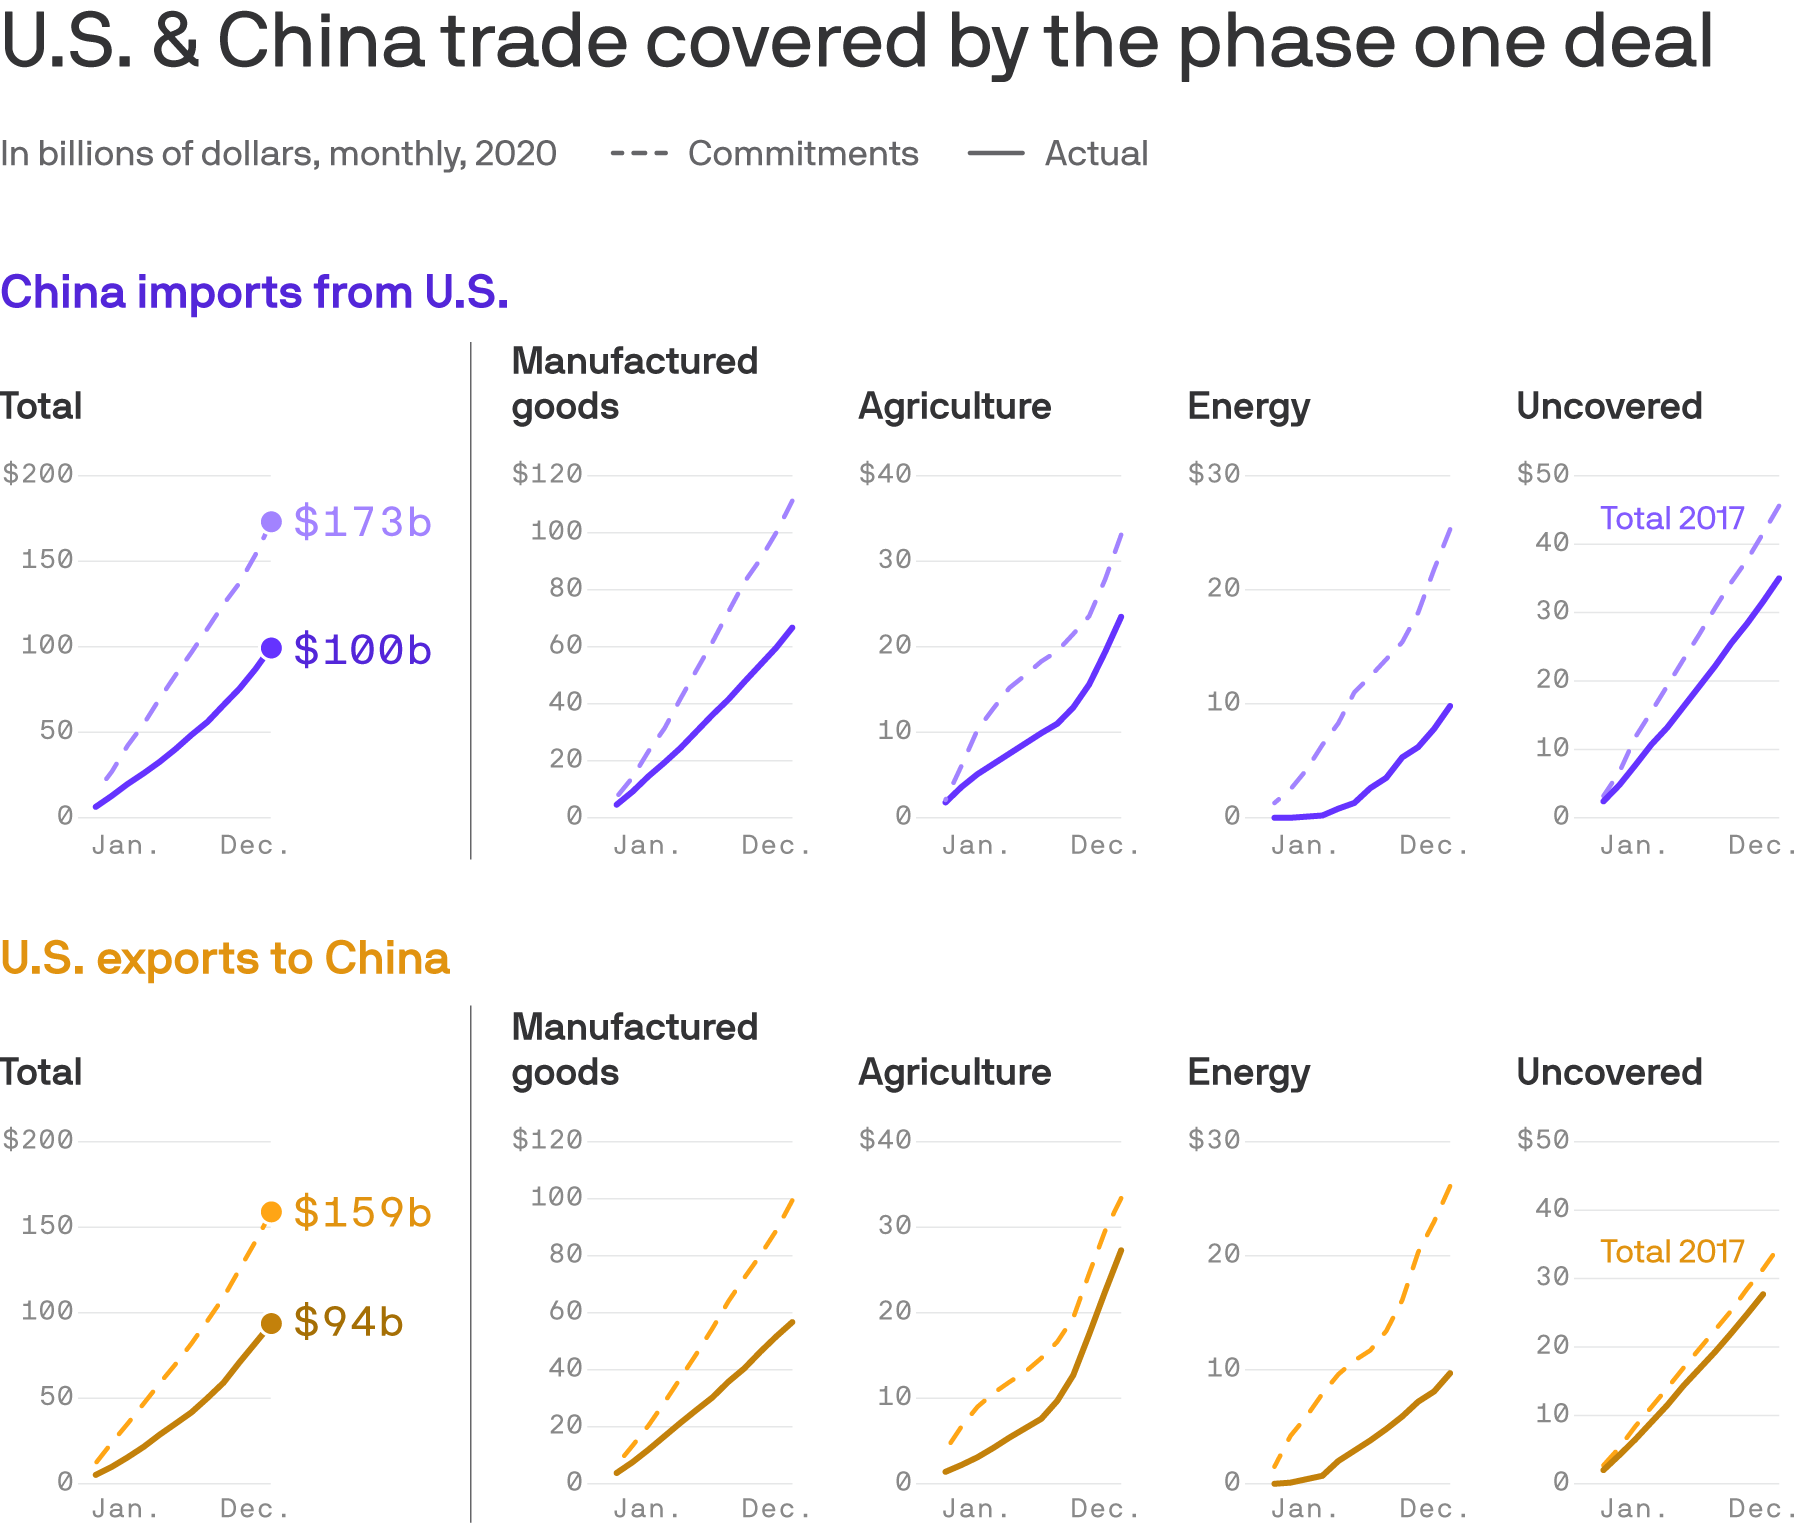 Reproduced from Peterson Institute for International Economics; Chart: Axios Visuals